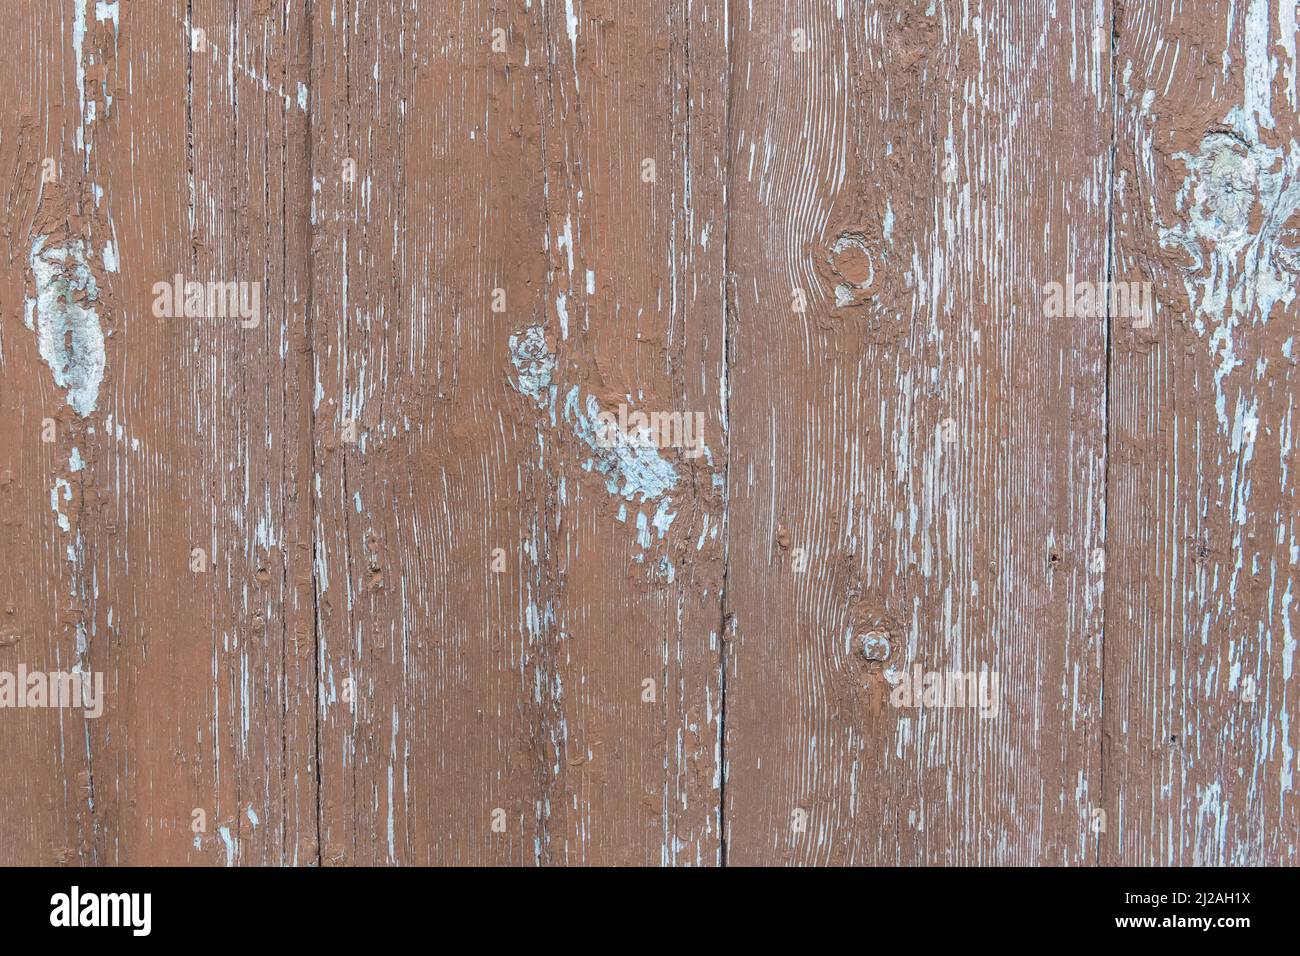 Old wooden boards Stock Photo by ©valzan 59550611